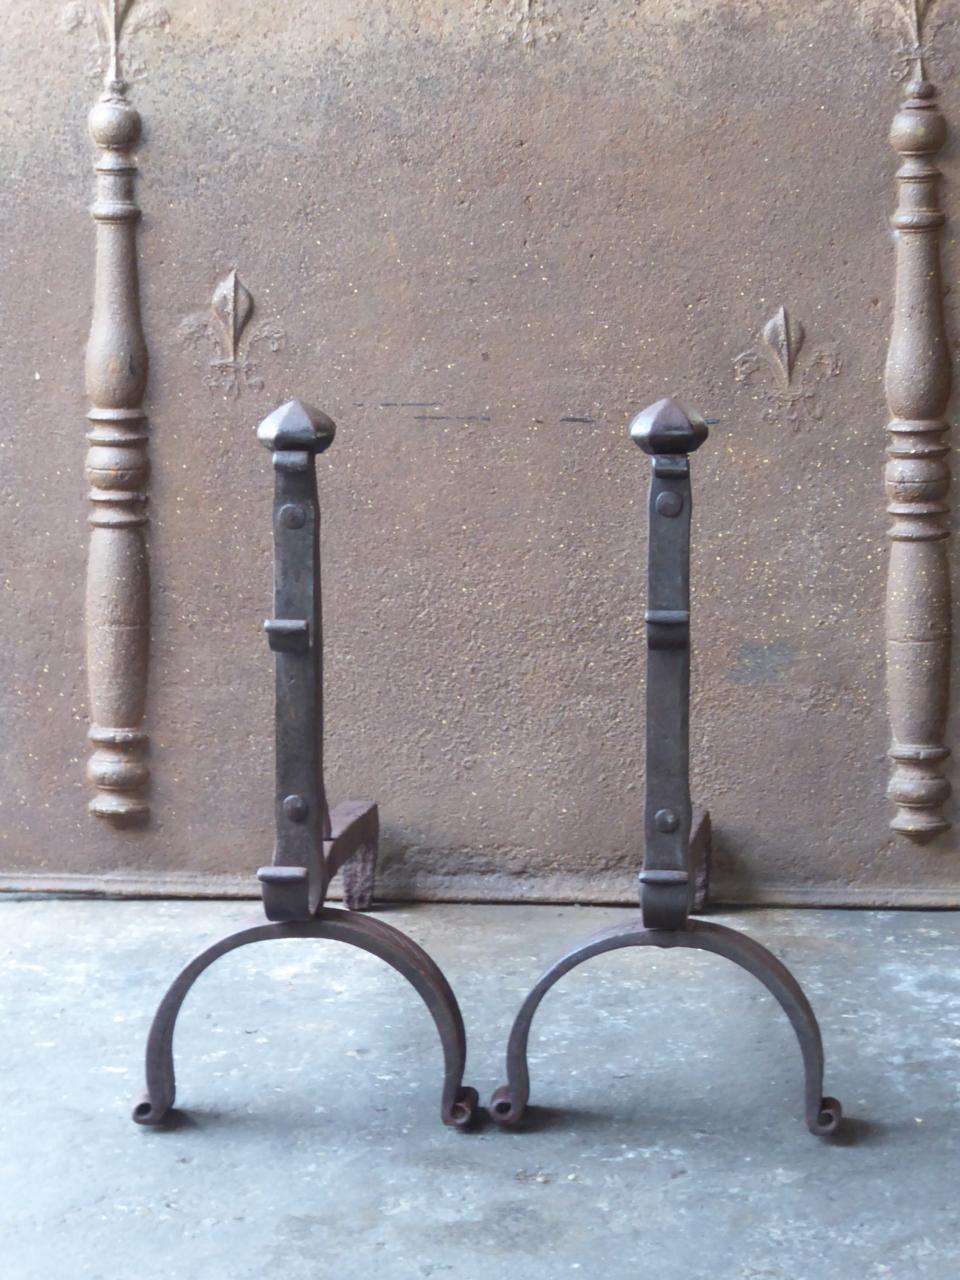 18th century French Louis XV andirons made of wrought iron. The andirons have spit hooks to grill food.

We have a unique and specialized collection of antique and used fireplace accessories consisting of more than 1000 listings at 1stdibs. Amongst